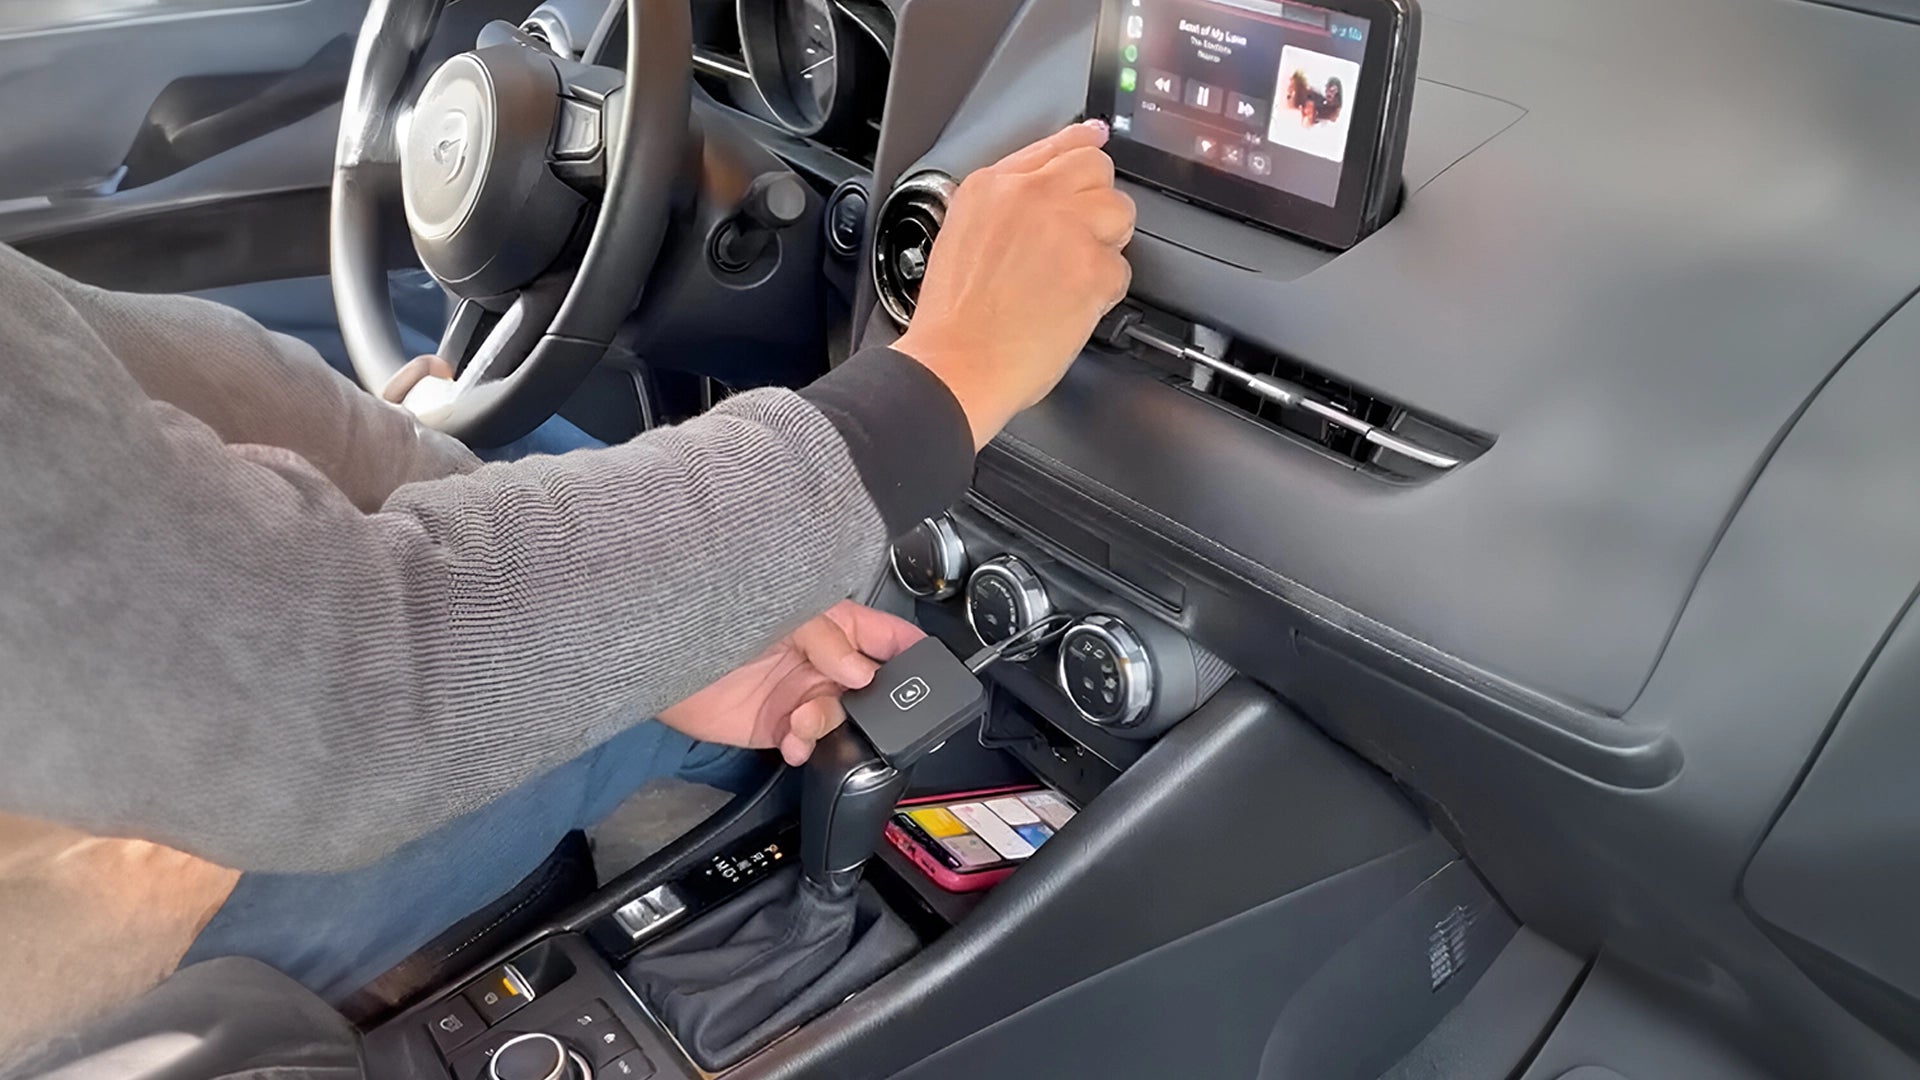 Driver interacting with a CarPlay system in a vehicle's dashboard, showcasing the ease of accessing car multimedia features